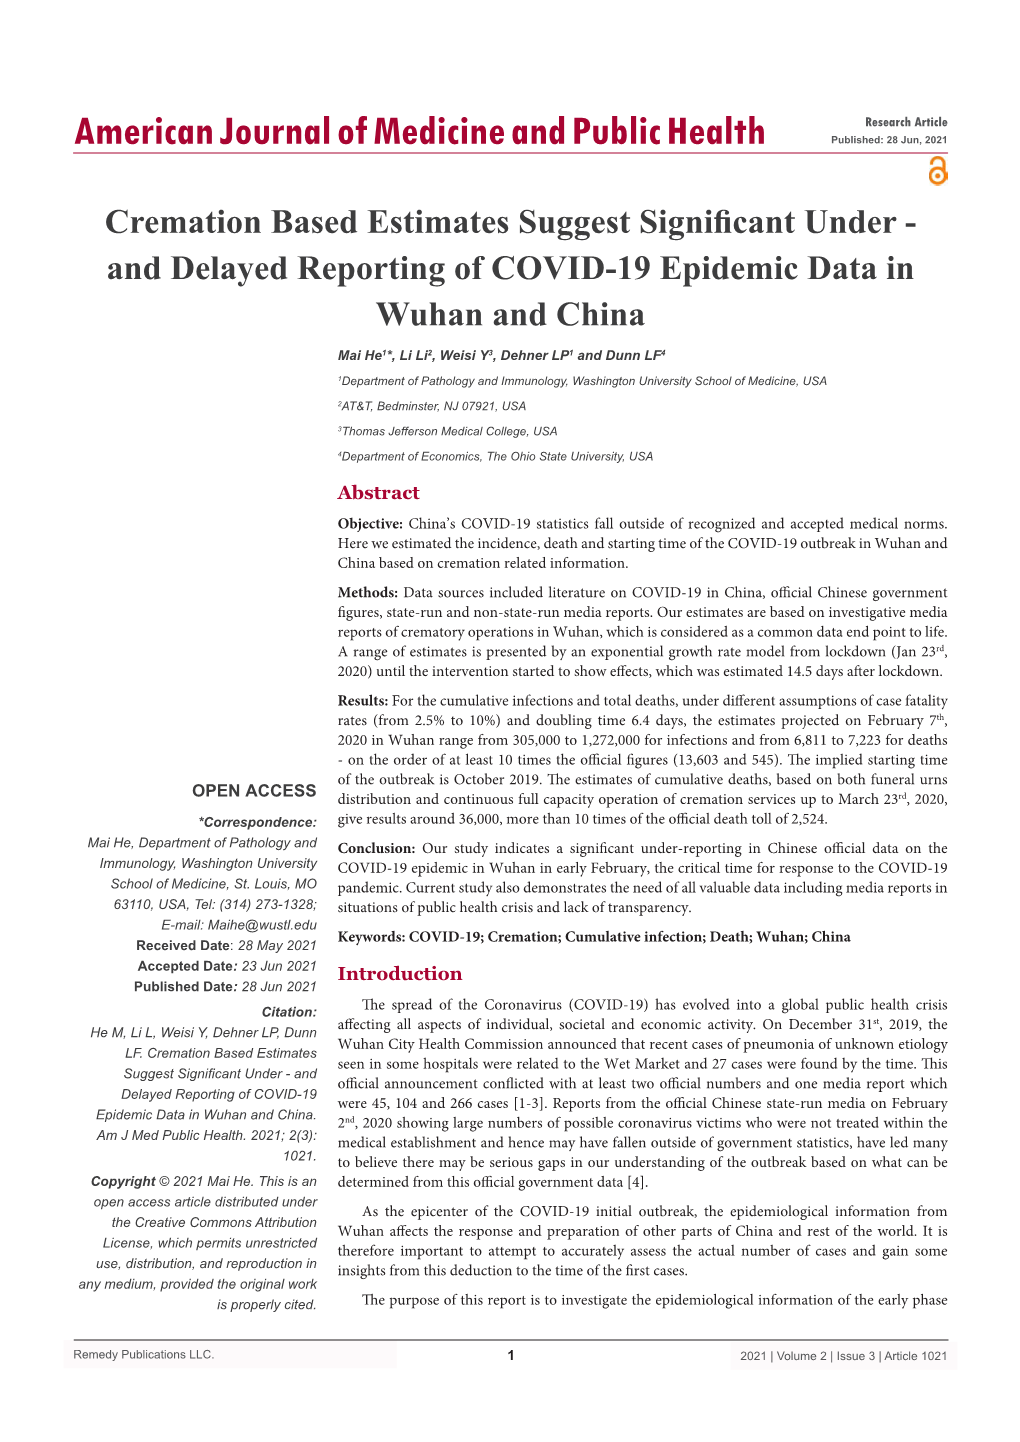 Cremation Based Estimates Suggest Significant Under - and Delayed Reporting of COVID-19 Epidemic Data in Wuhan and China